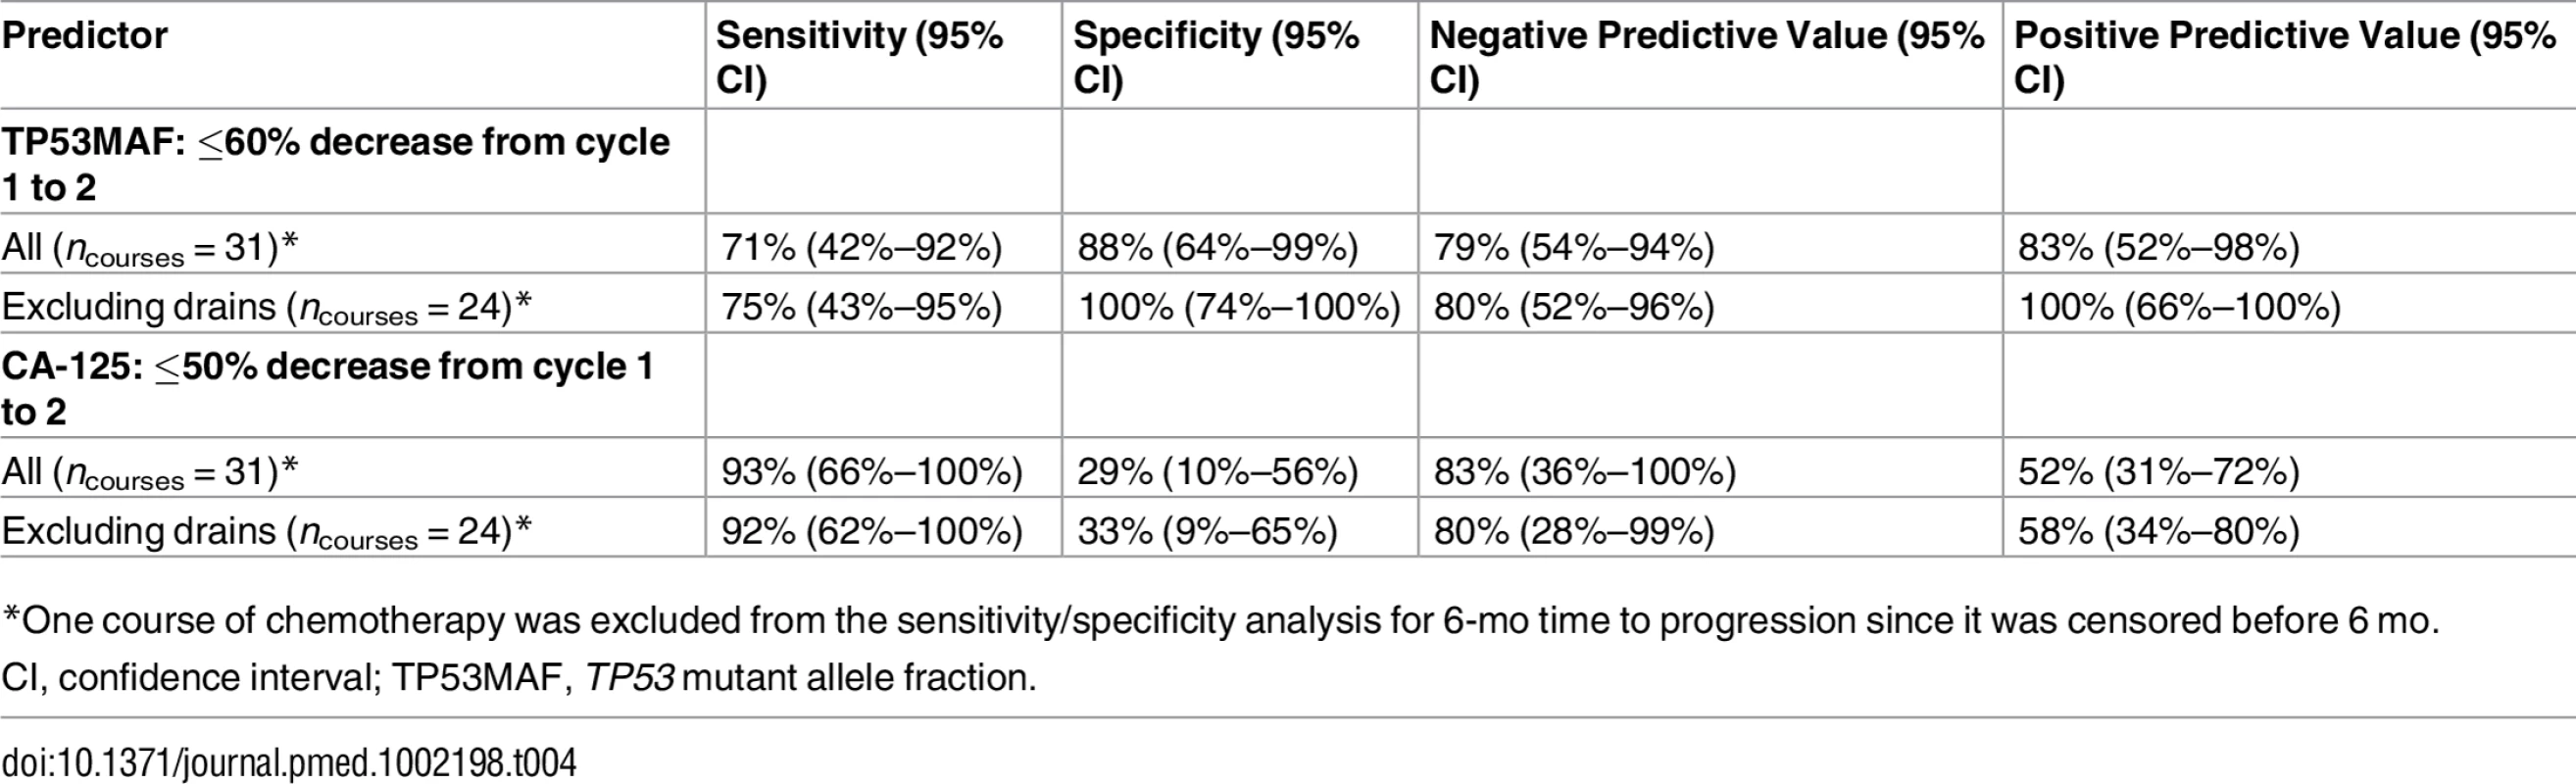 Sensitivity and specificity of a decrease in <i>TP53</i> mutant allele fraction and CA-125 for predicting 6-mo time to progression following one cycle of chemotherapy.